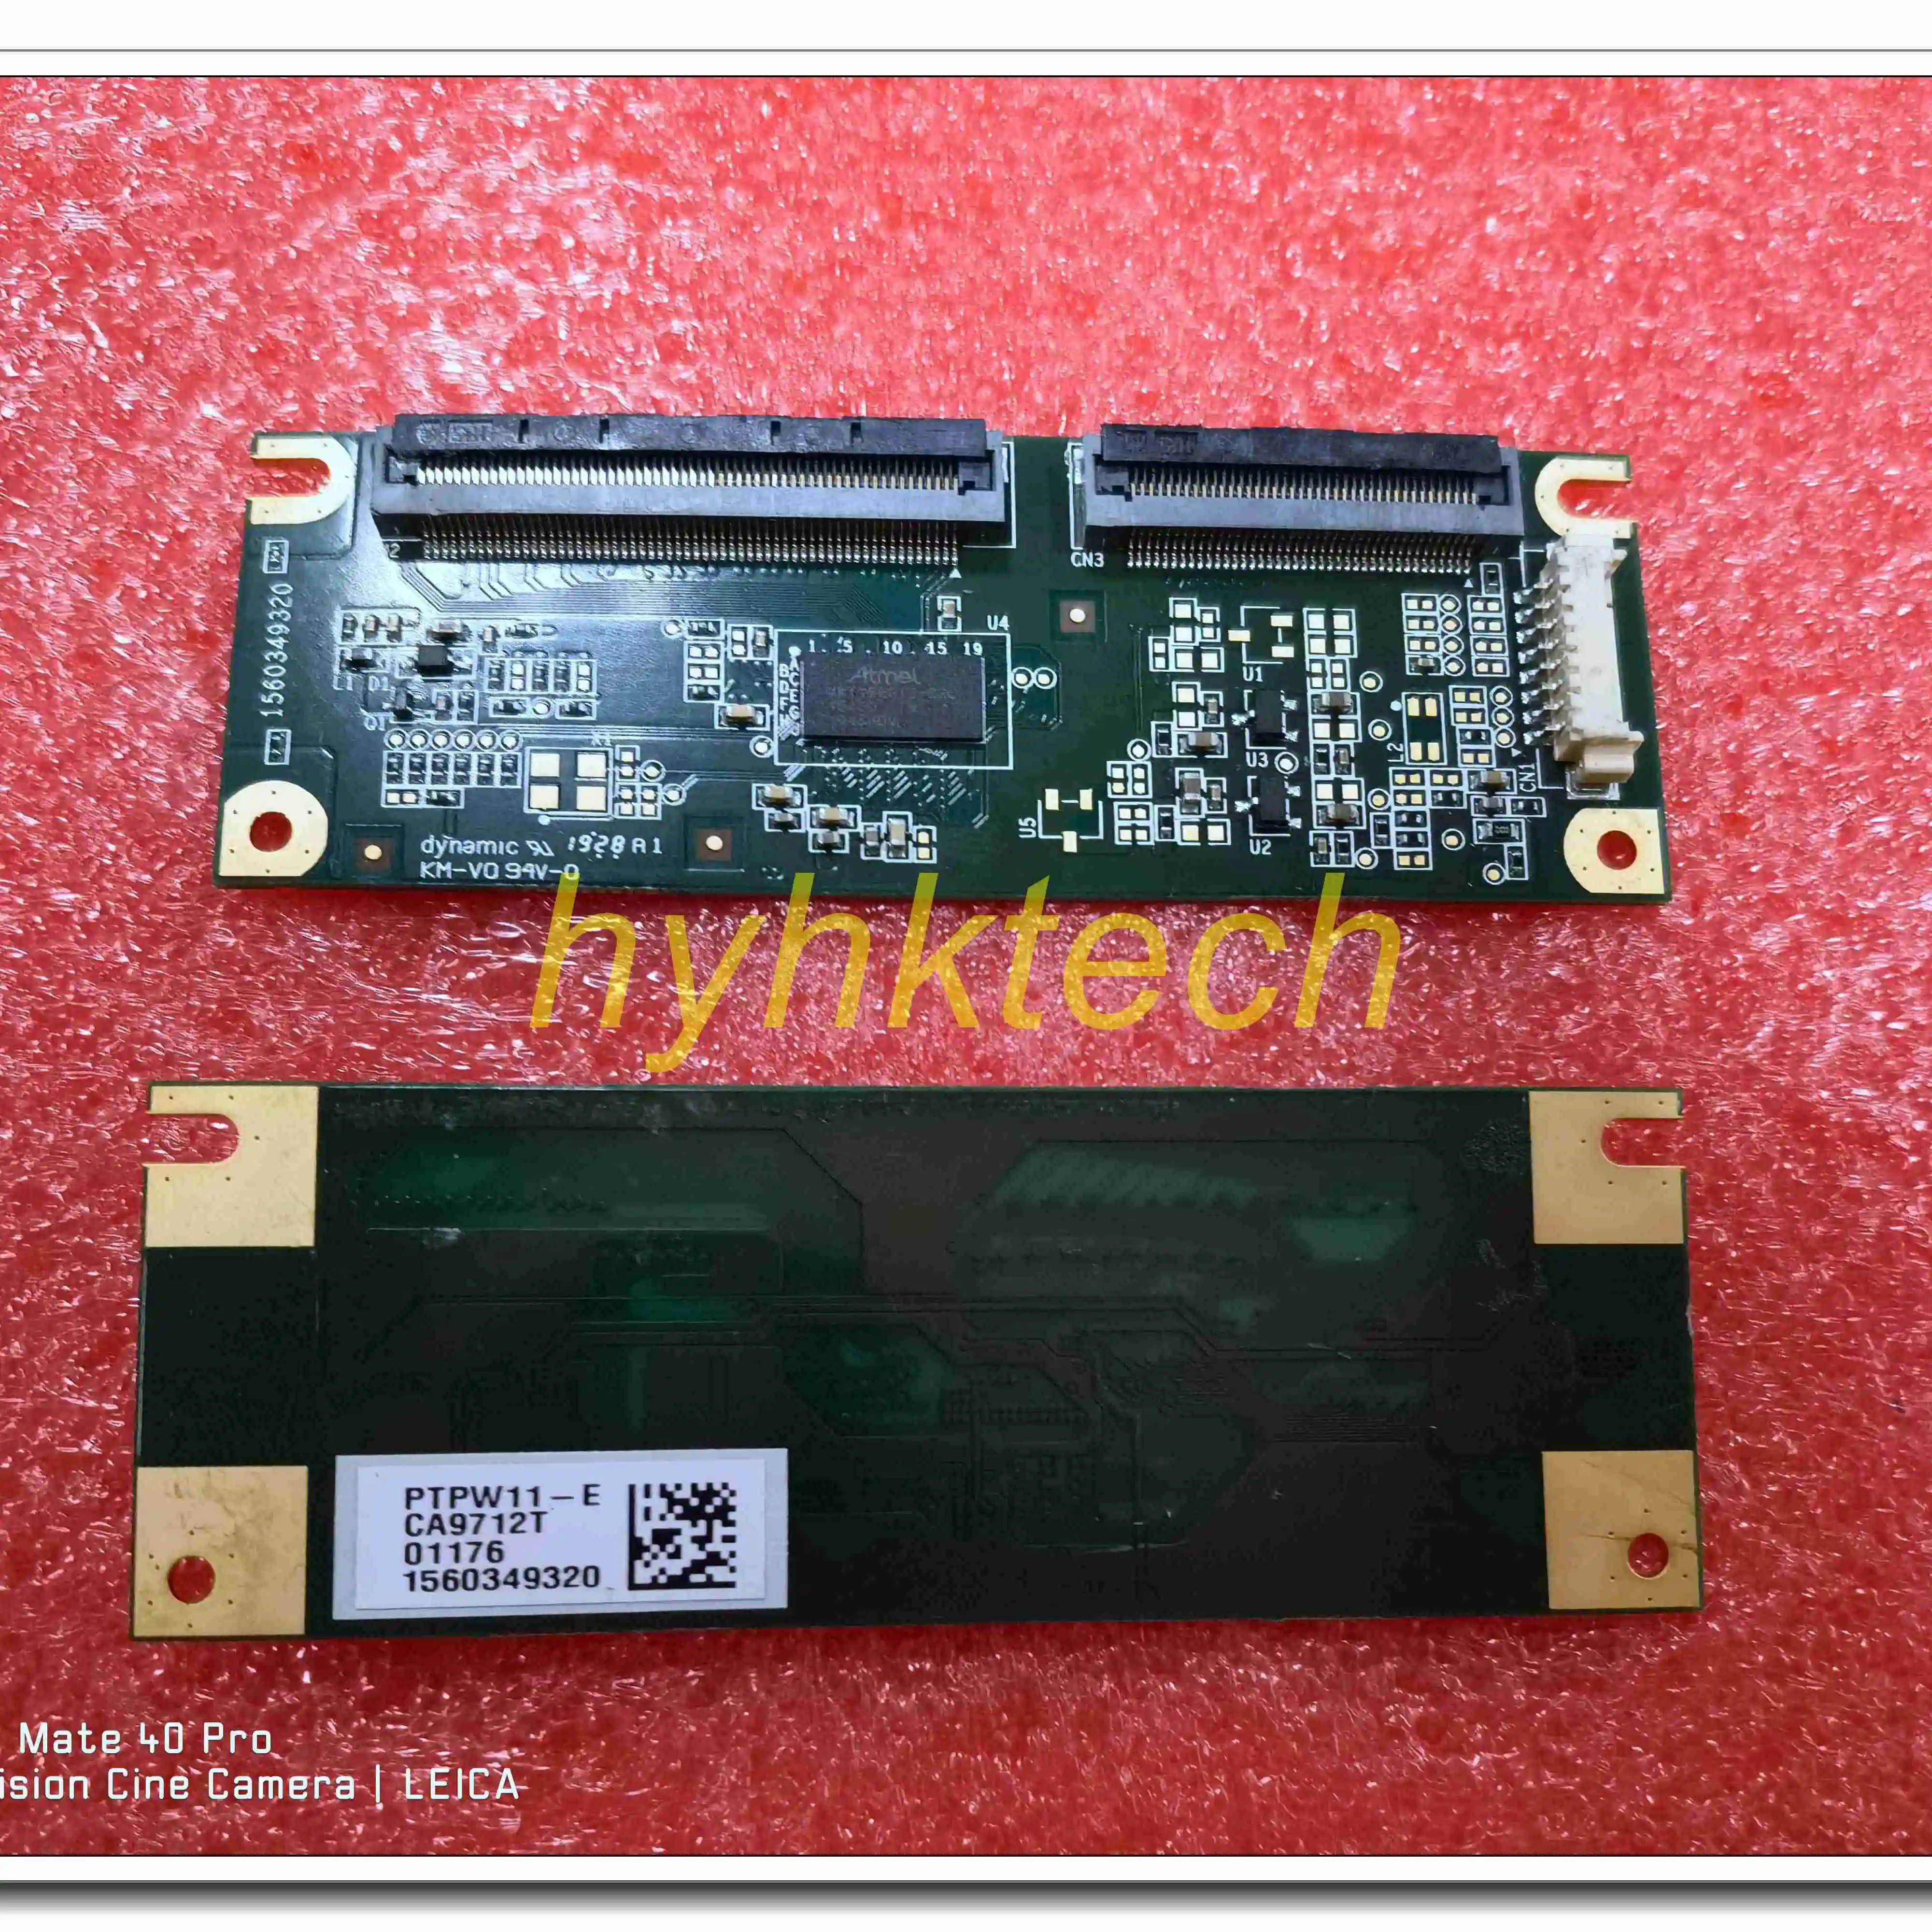 supply PTPW11-E CA9712T  (1560349320)  LCD Invernter ,used for 15.4 inch LCD panel, 100% tested.